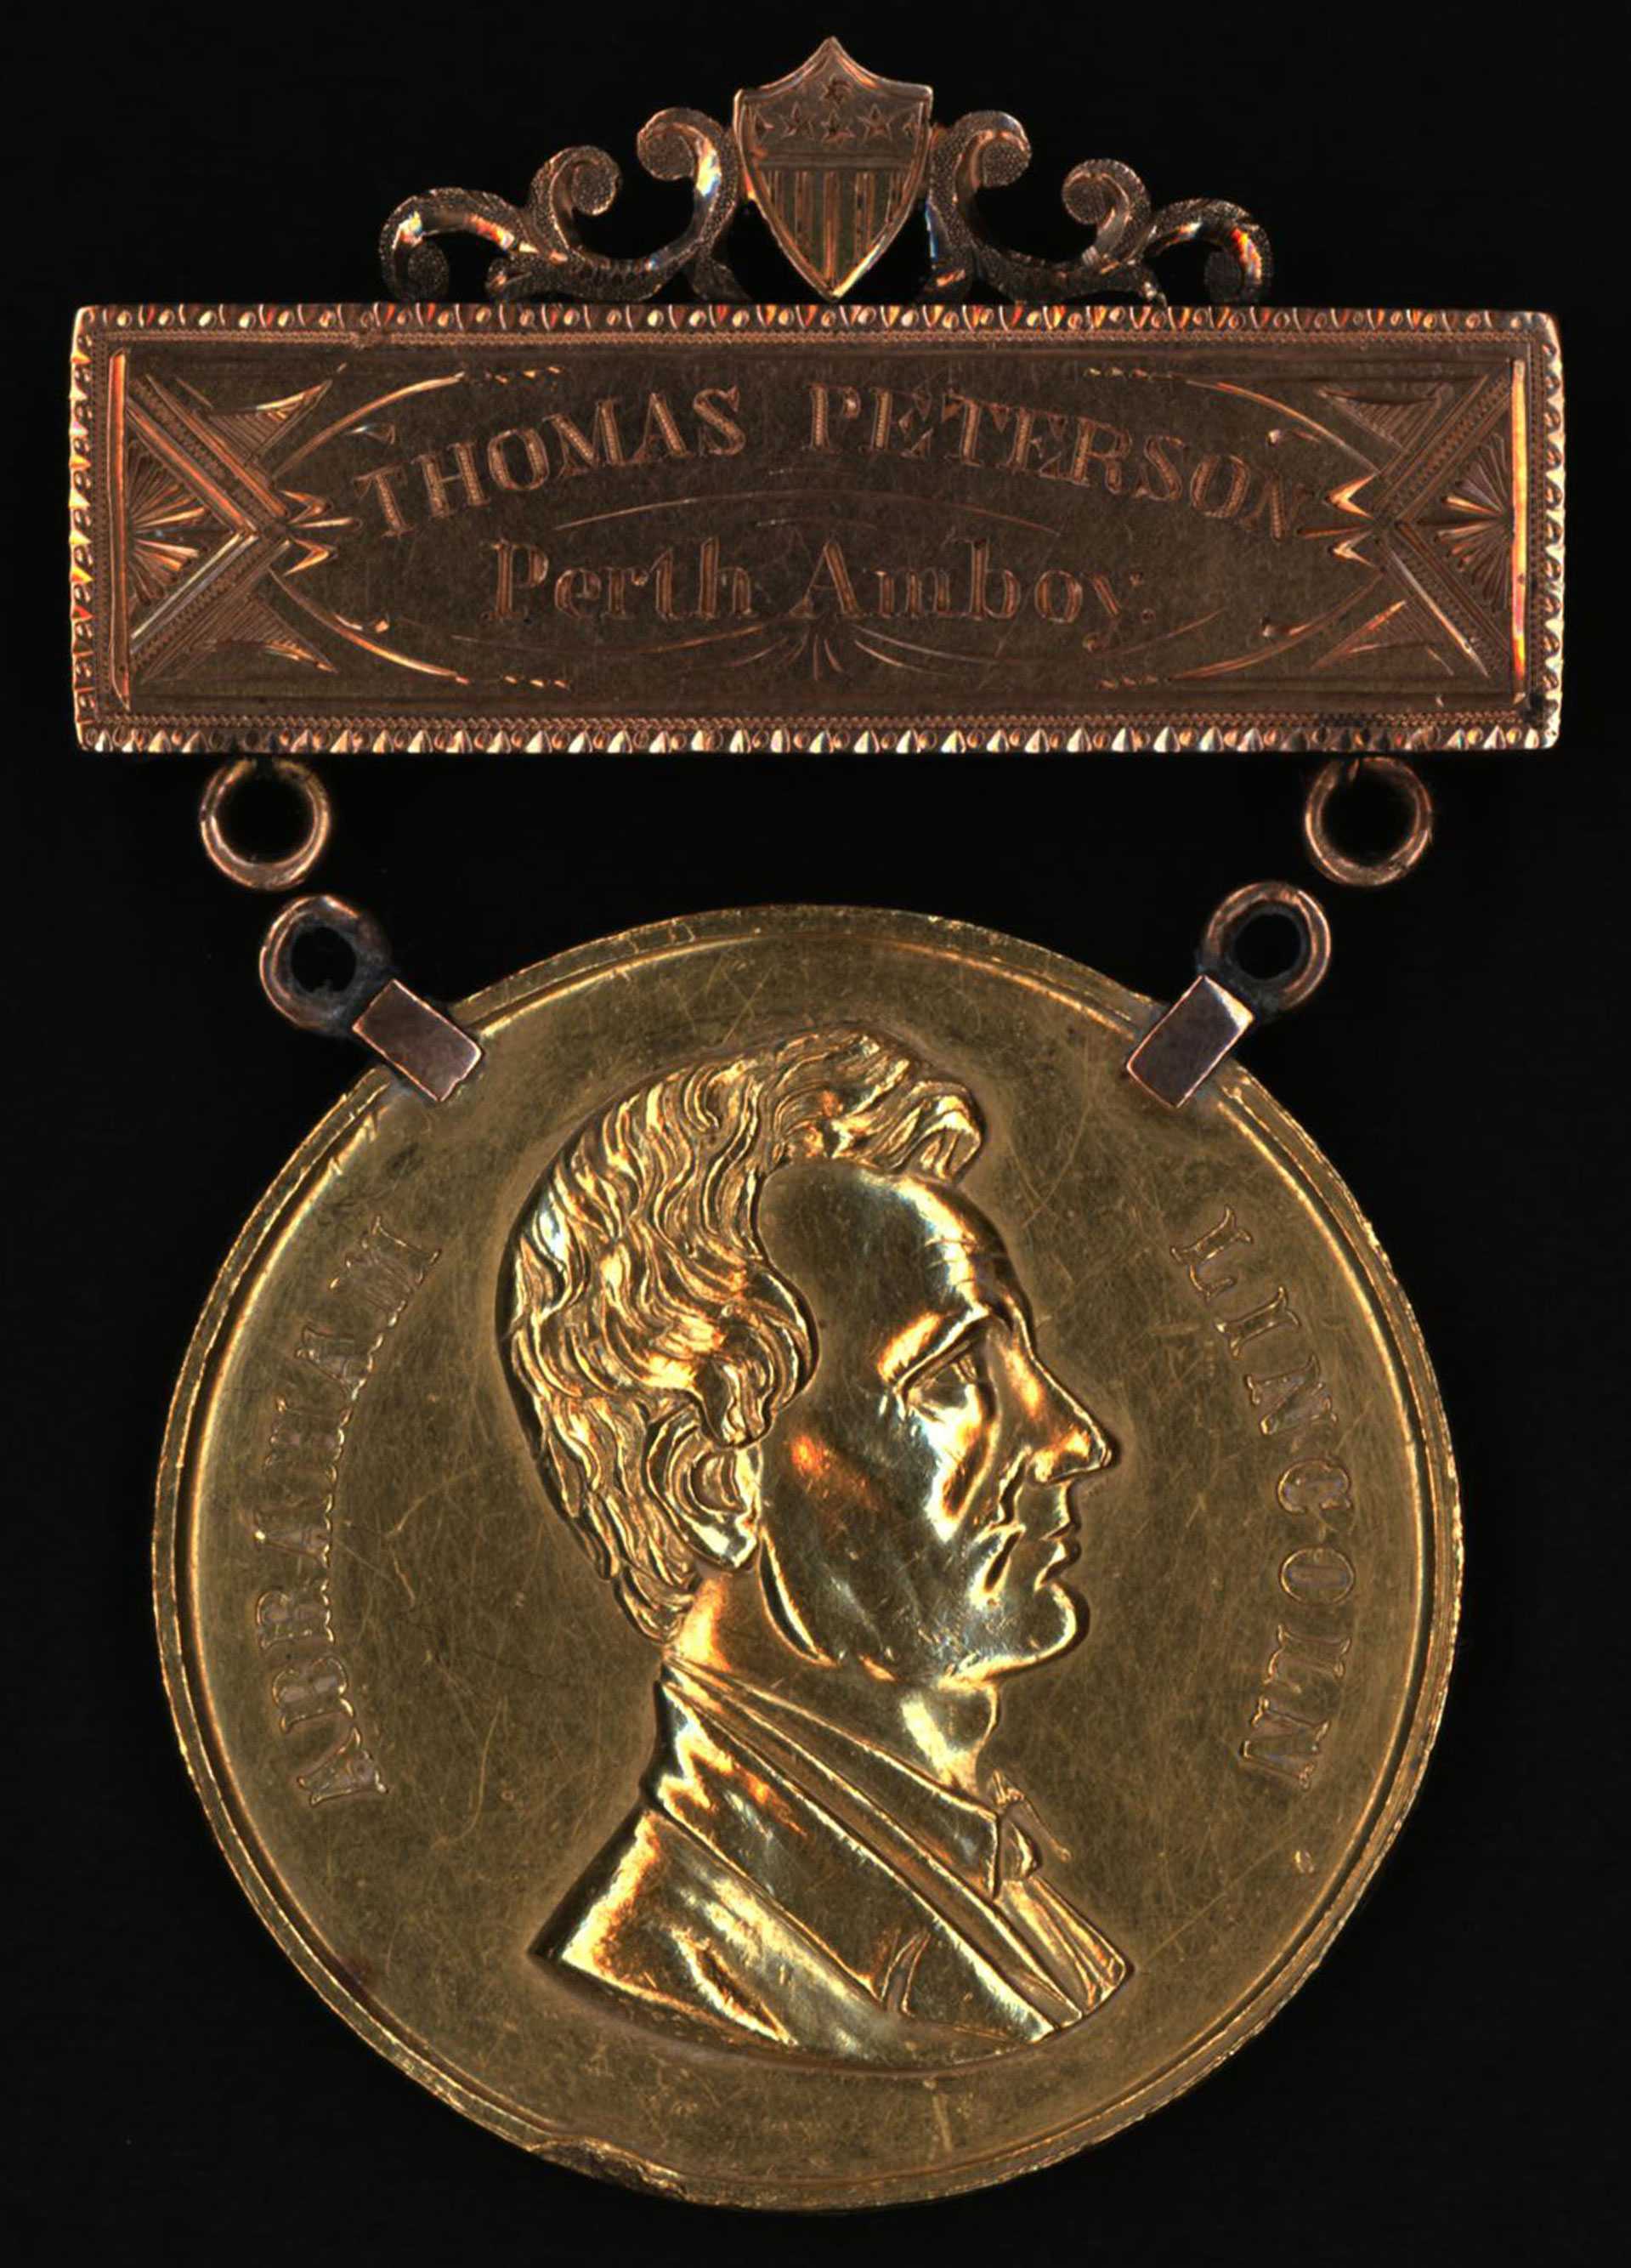 Gold medal embossed with the profile of Thomas Mundy Peterson.  The medal dangles from a gold bar engraved with " Thomas Peterson, Perth Amboy"